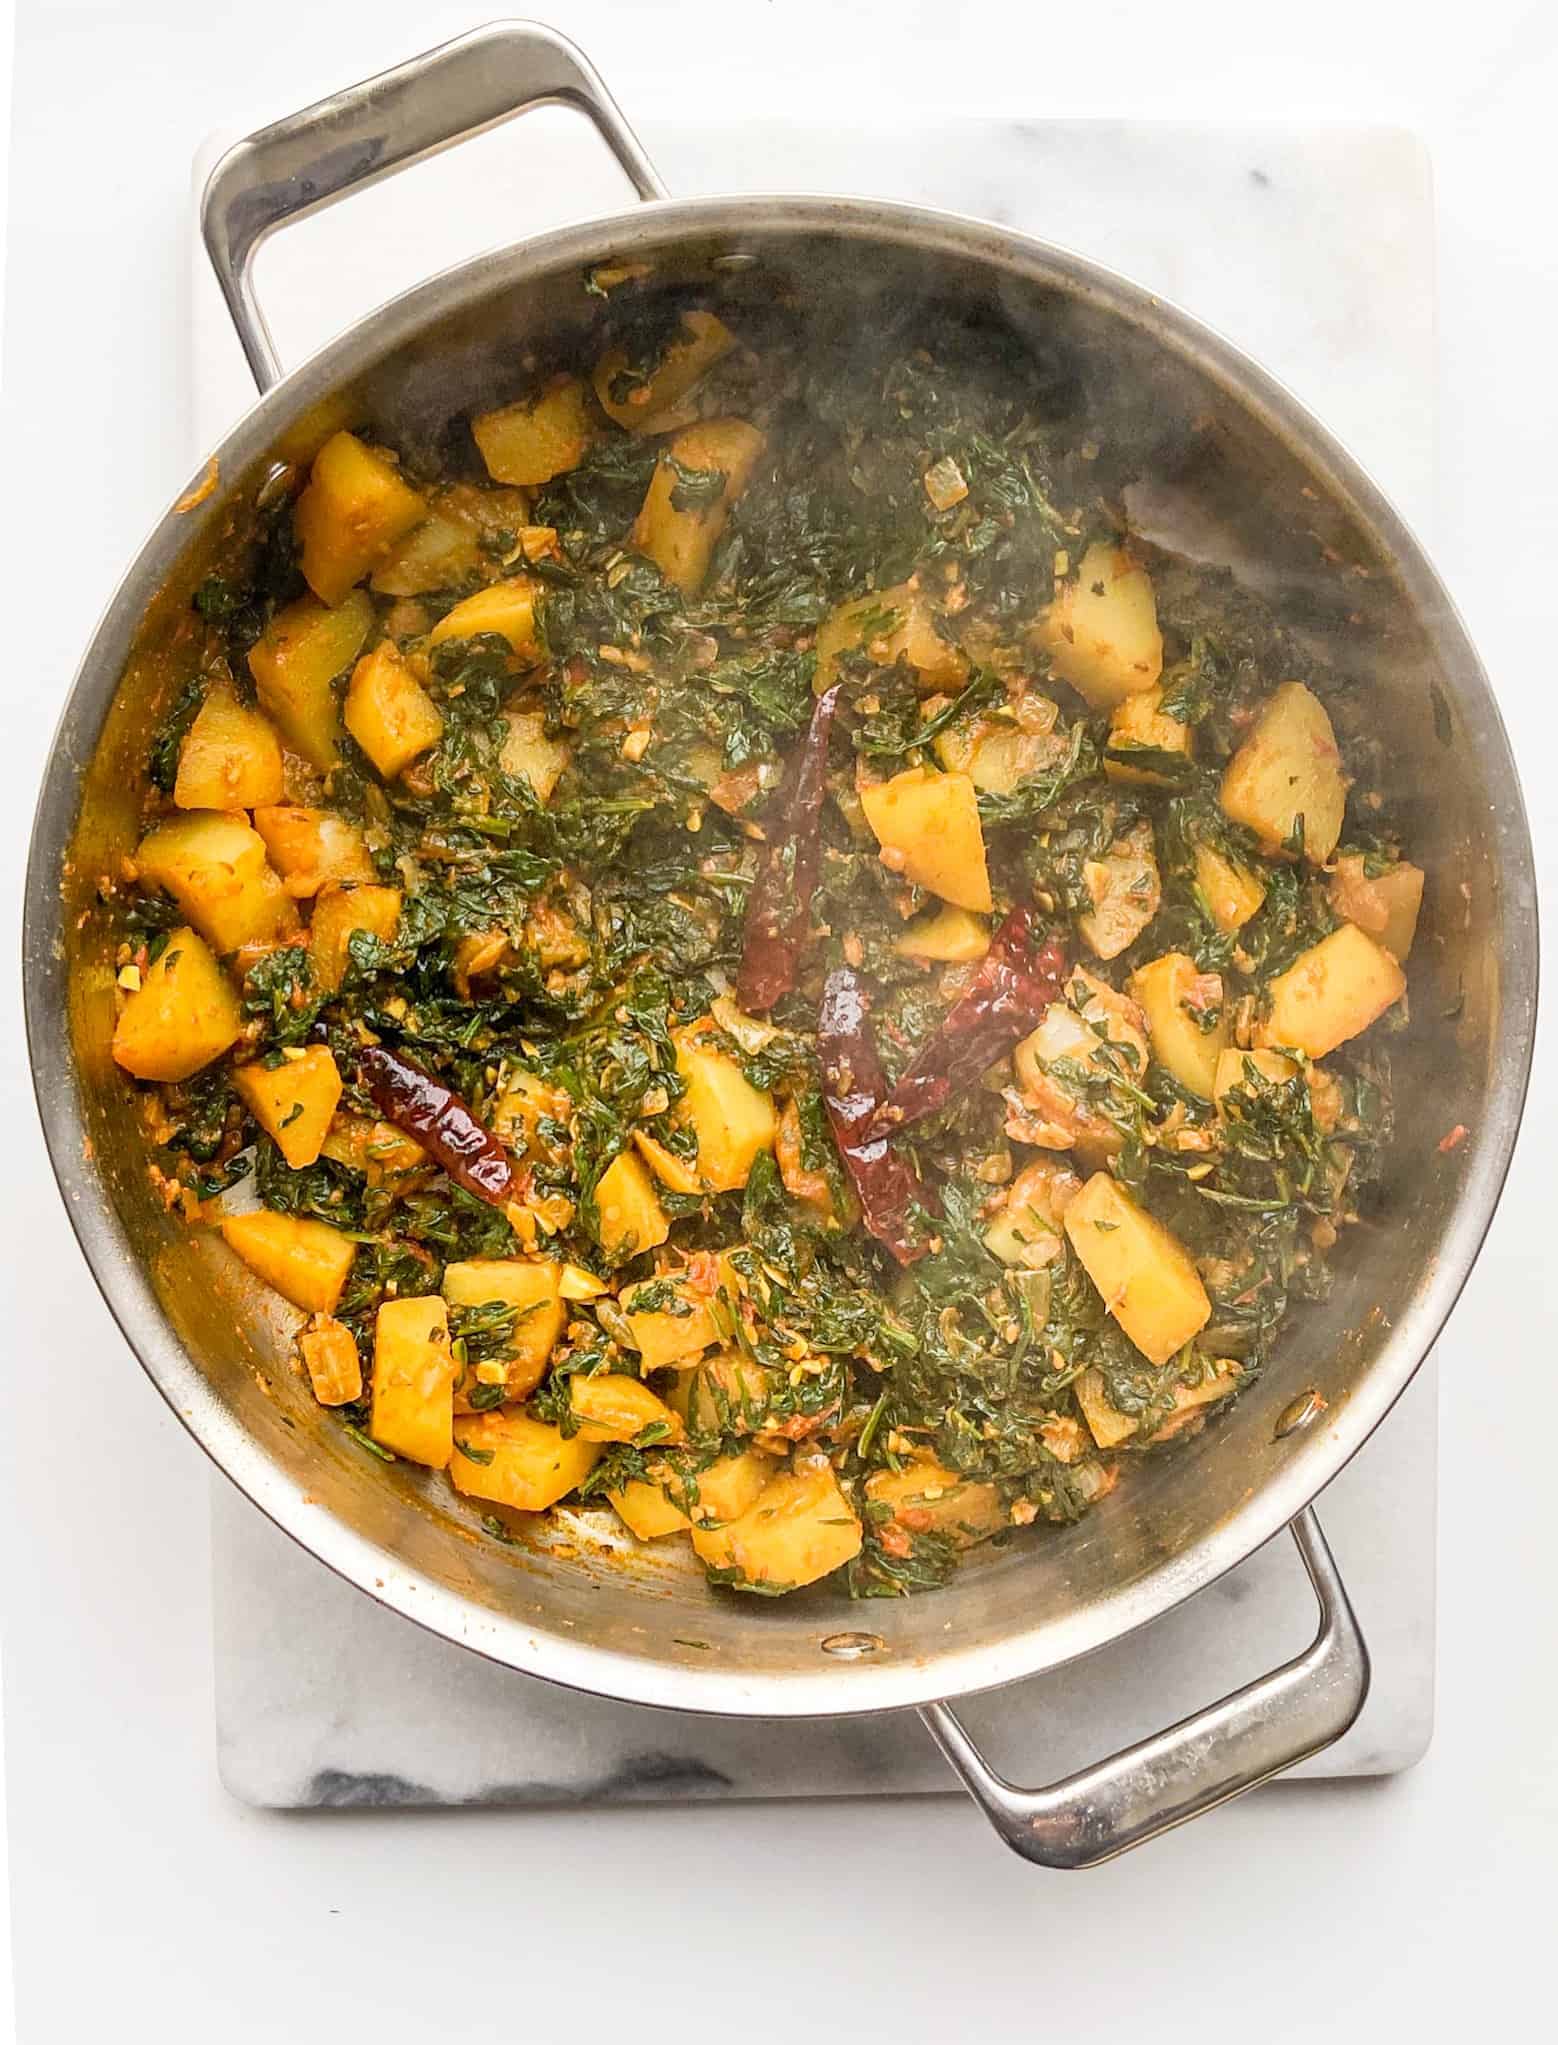 mix the wilted spinach and cook until spinach is tender.